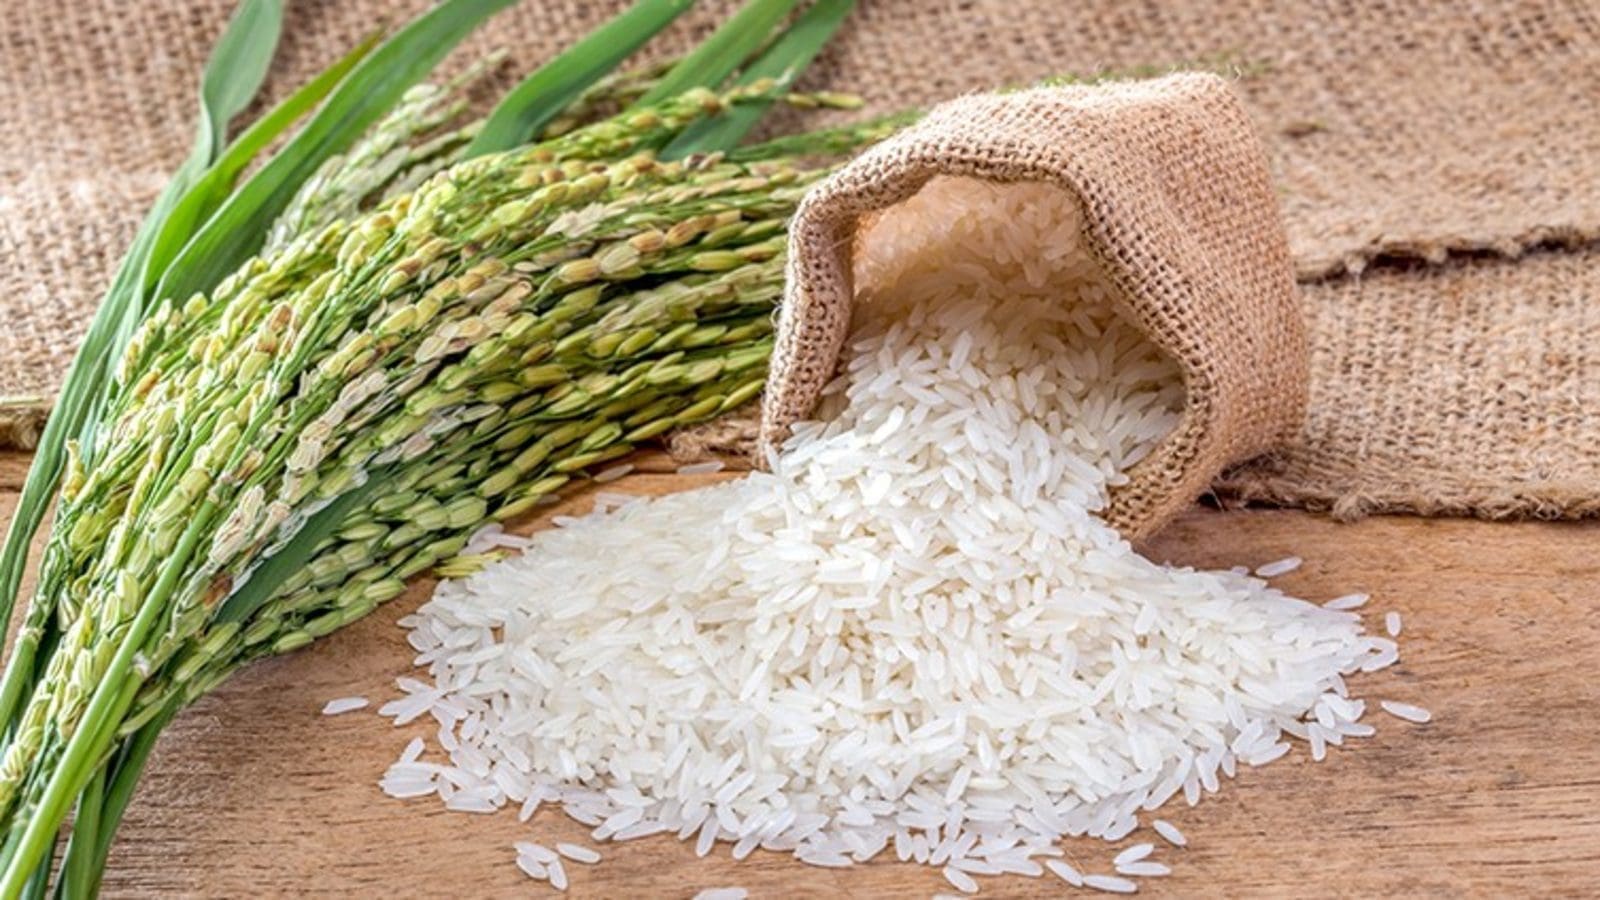 Ivorian government inks US$163M deal with Israeli firm to boost rice sector